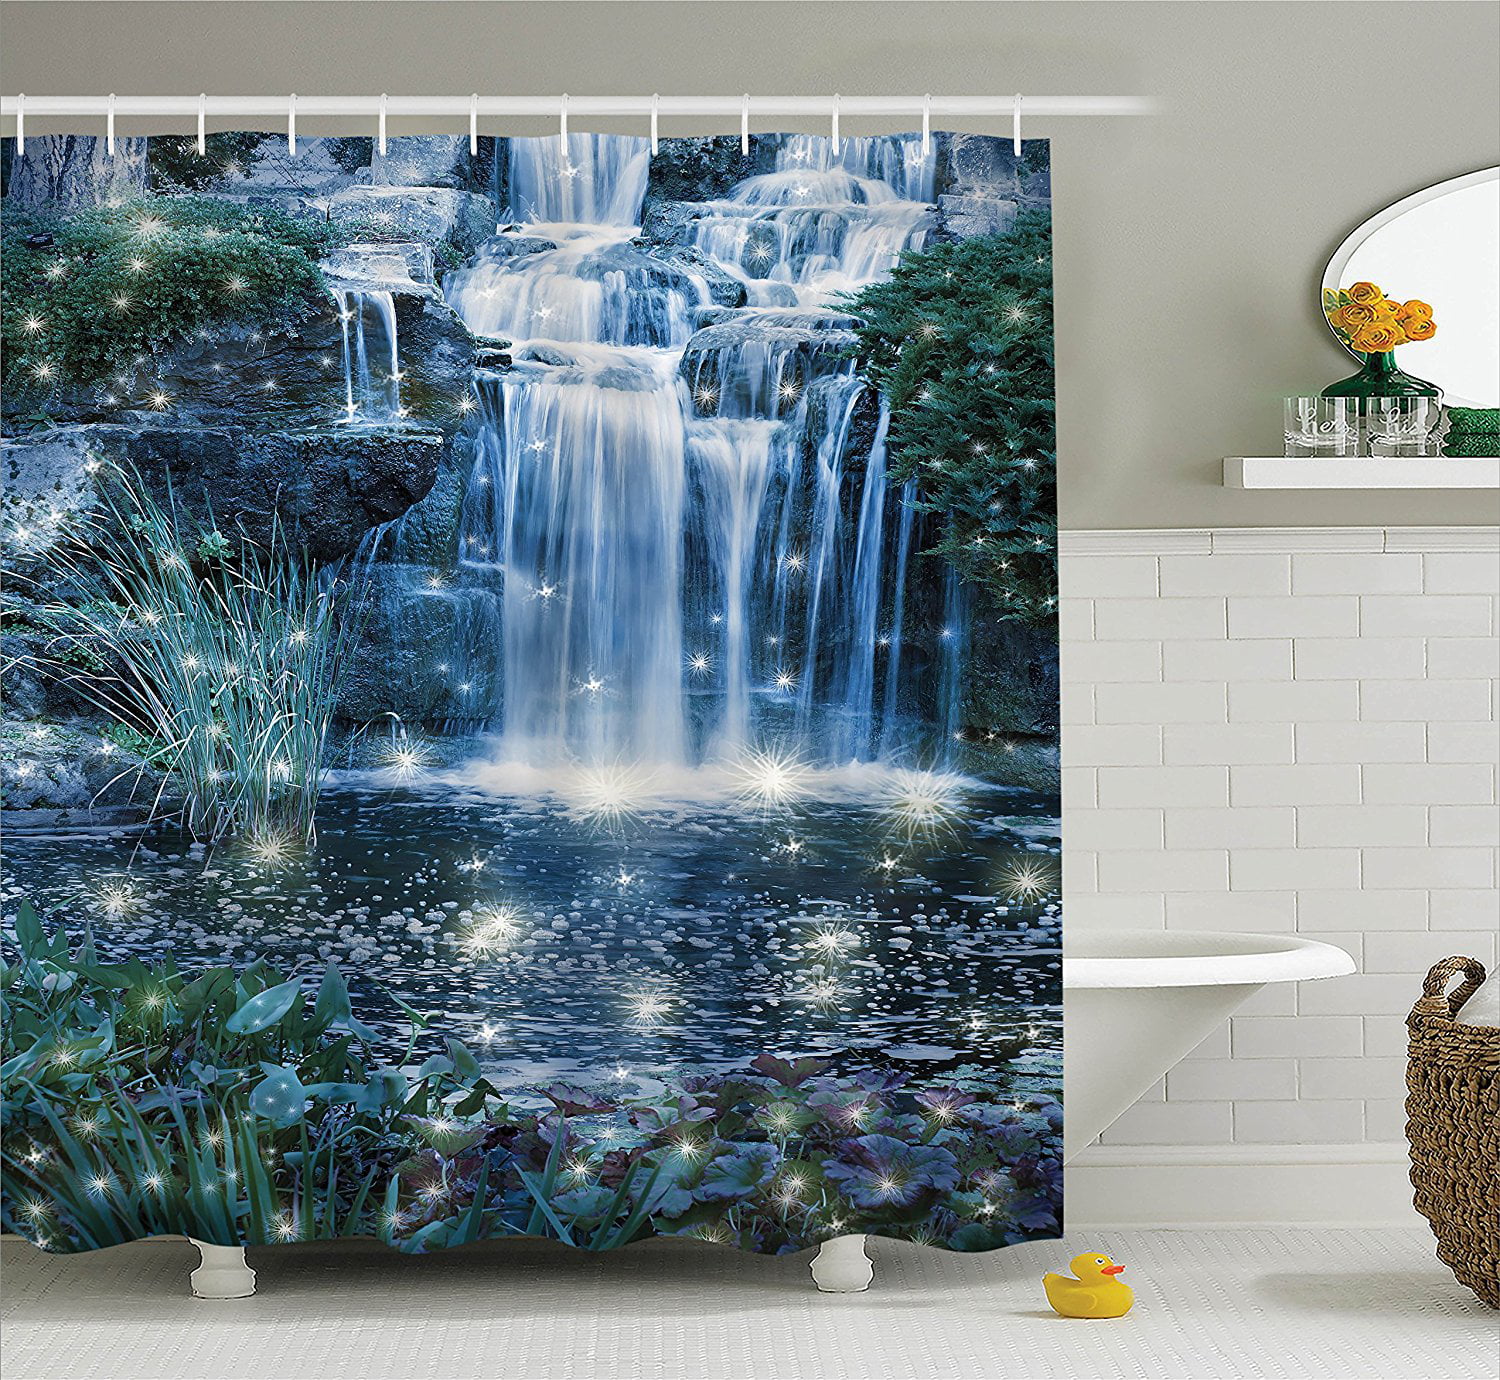 Details about   Shower Curtain Bathroom Decor Set Waterfall Landscape Printing Toilet Waterproof 